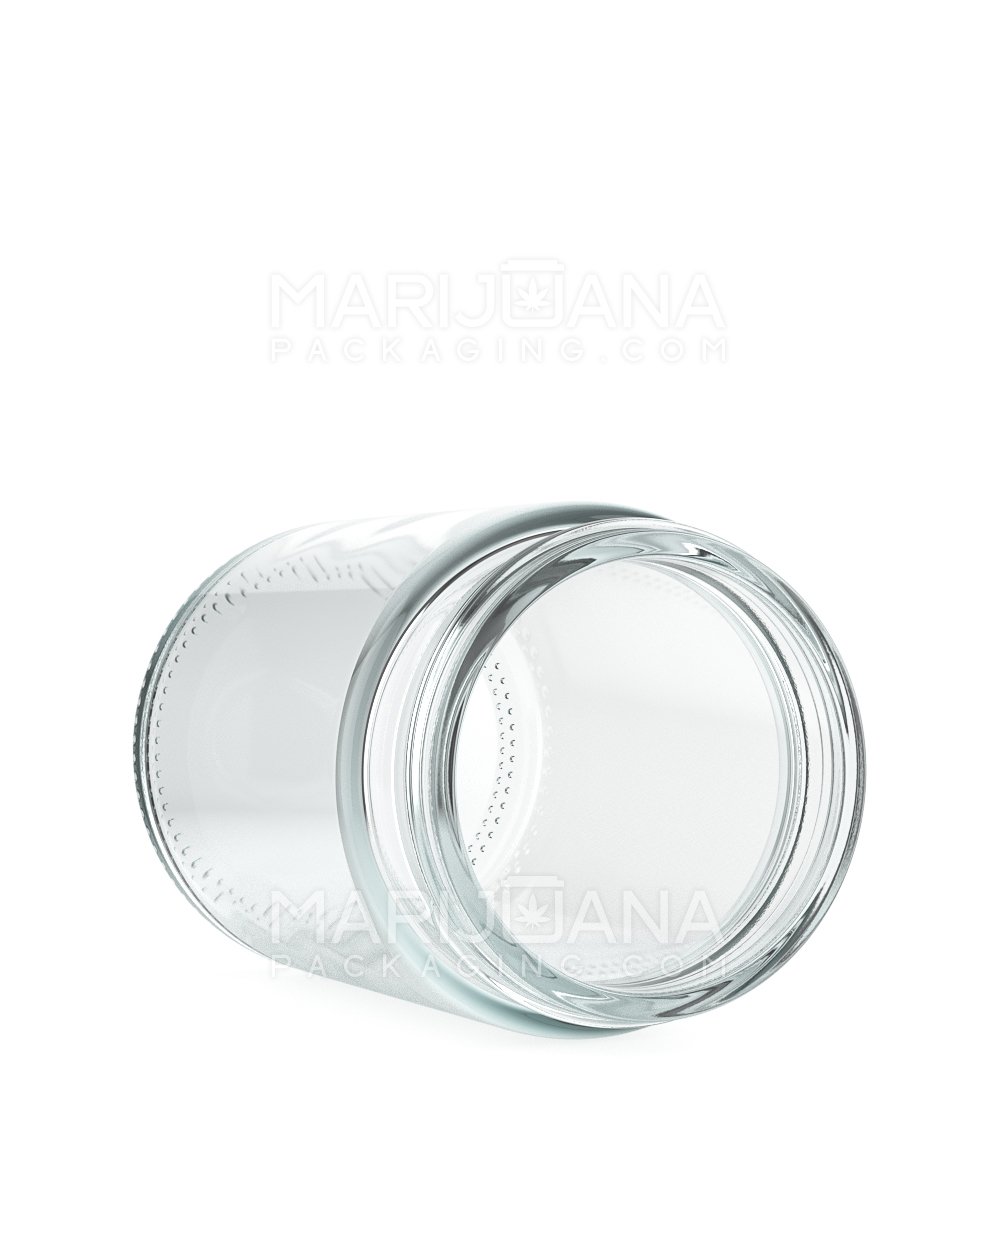 Straight Sided Clear Glass Jars | 50mm - 5oz - 100 Count - 3